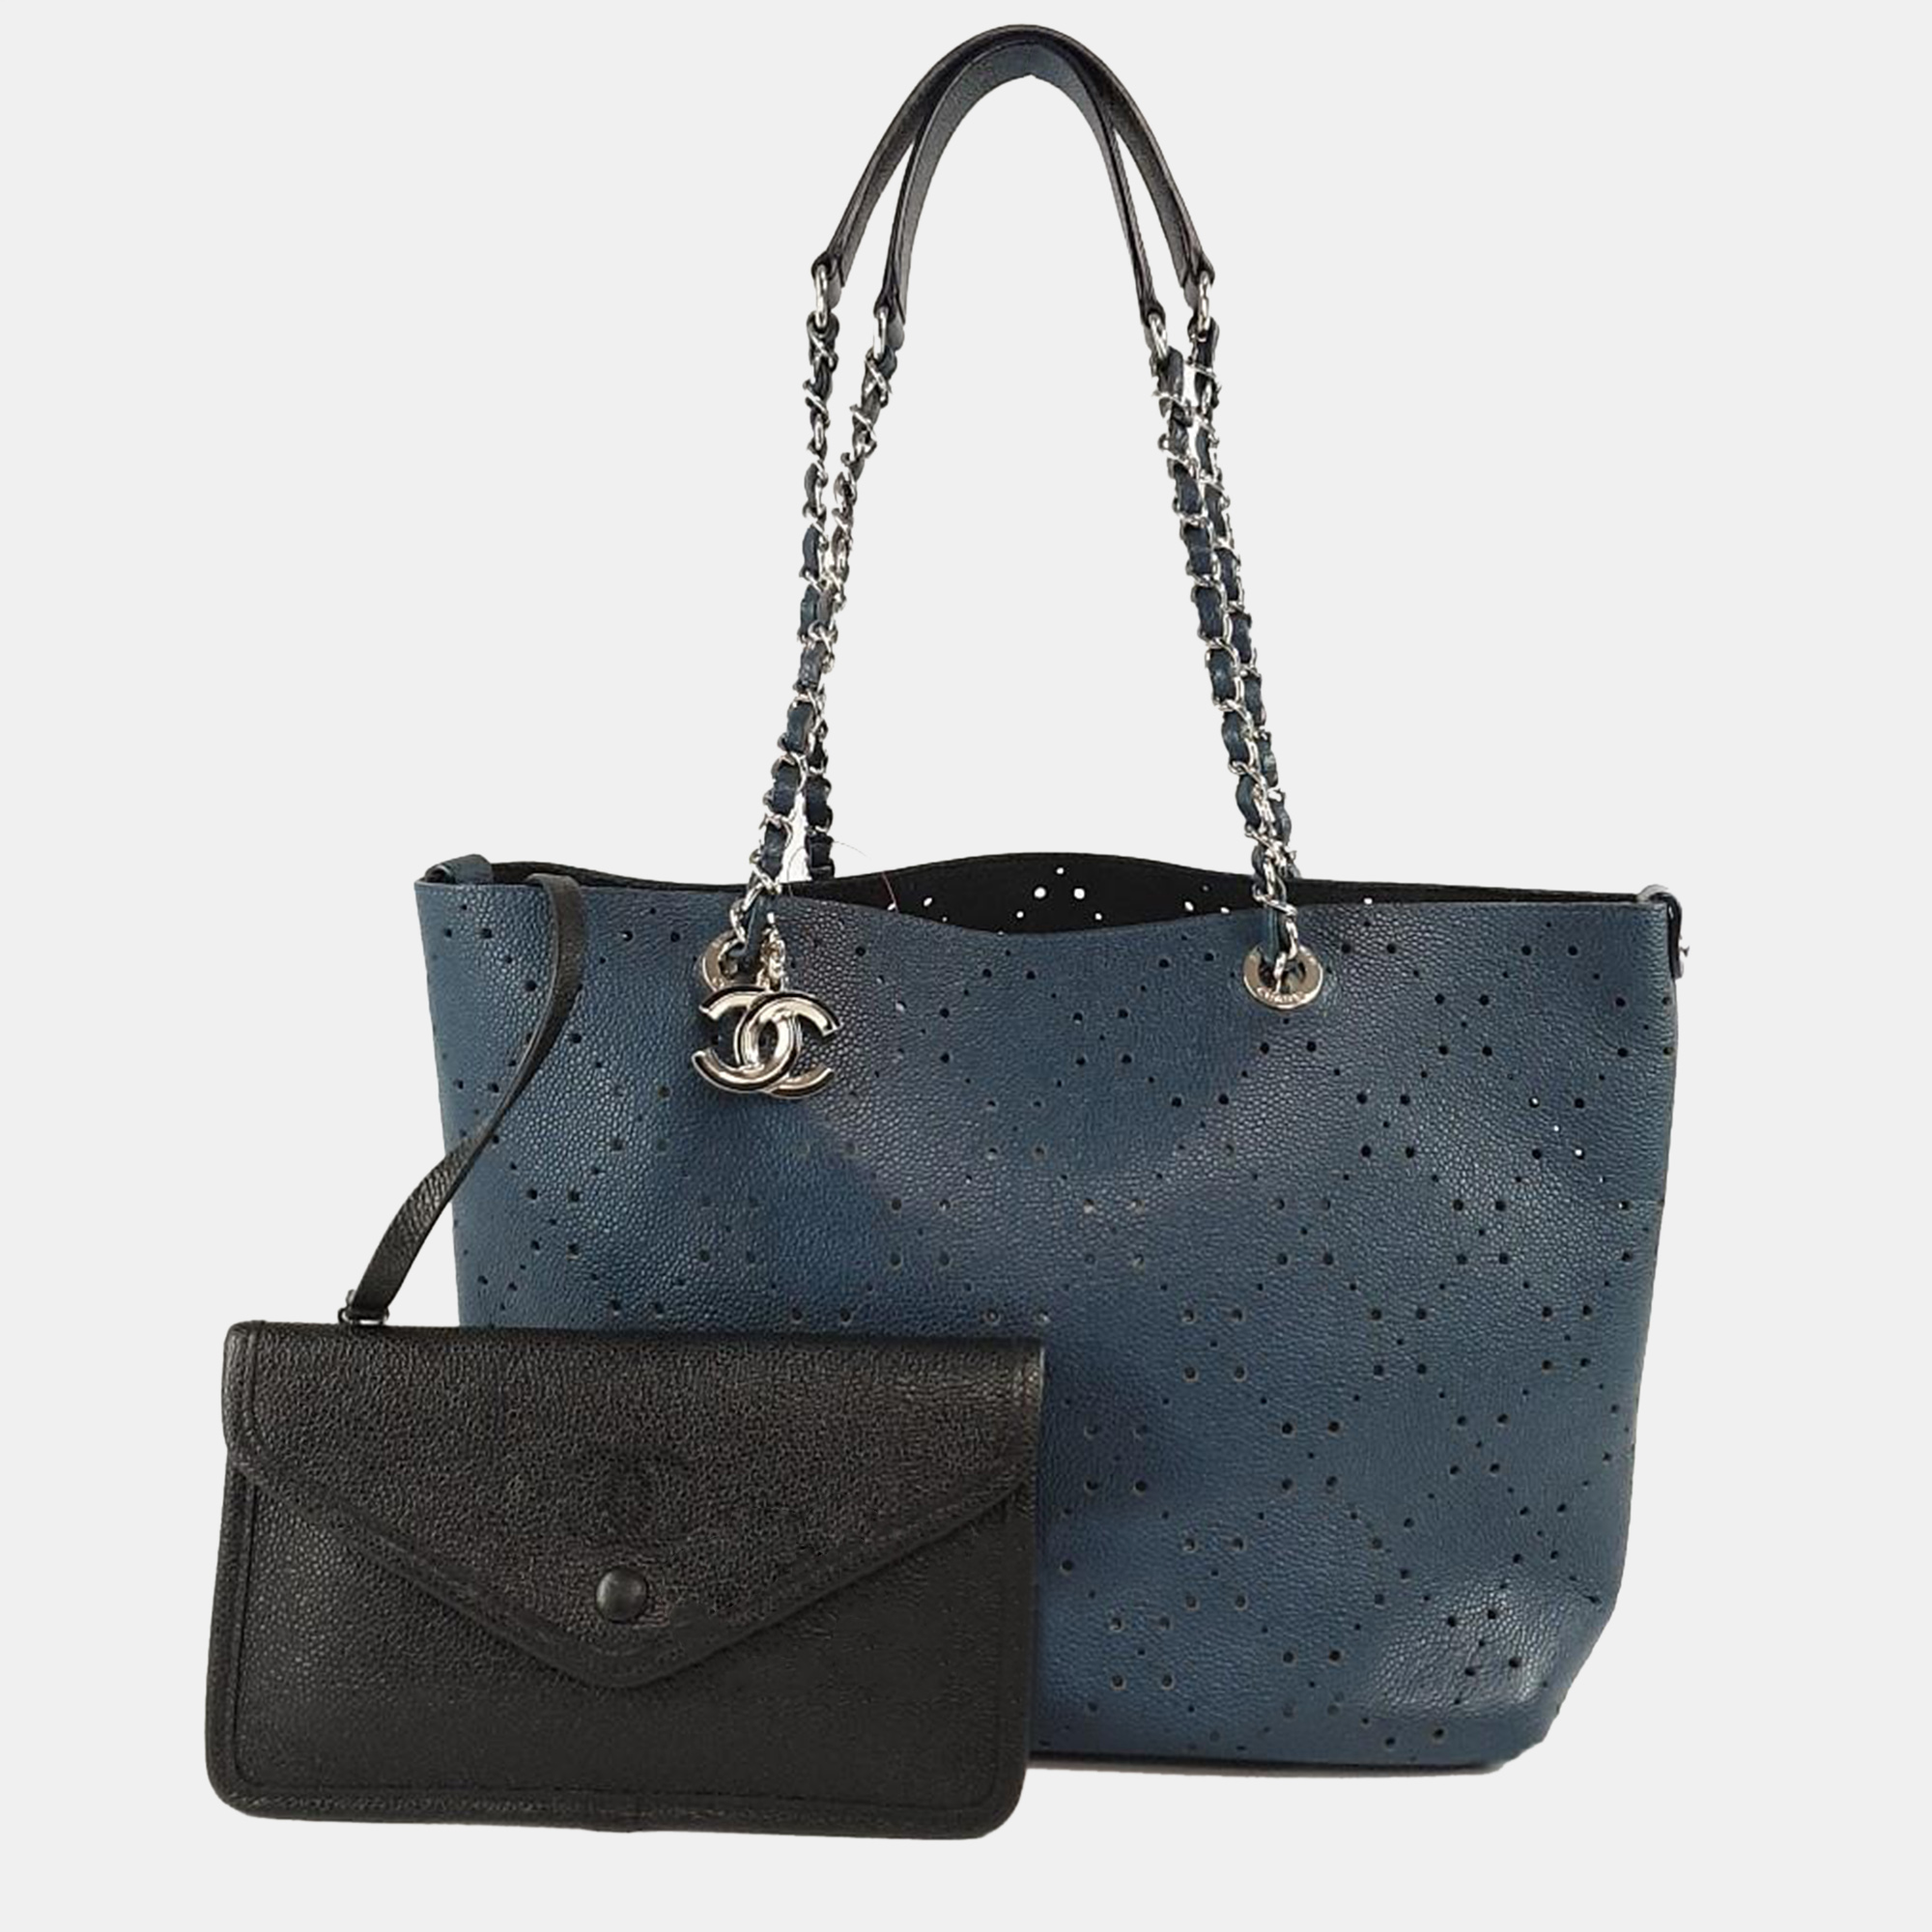 

Chanel Perforated Chain Shoulder Bag, Blue